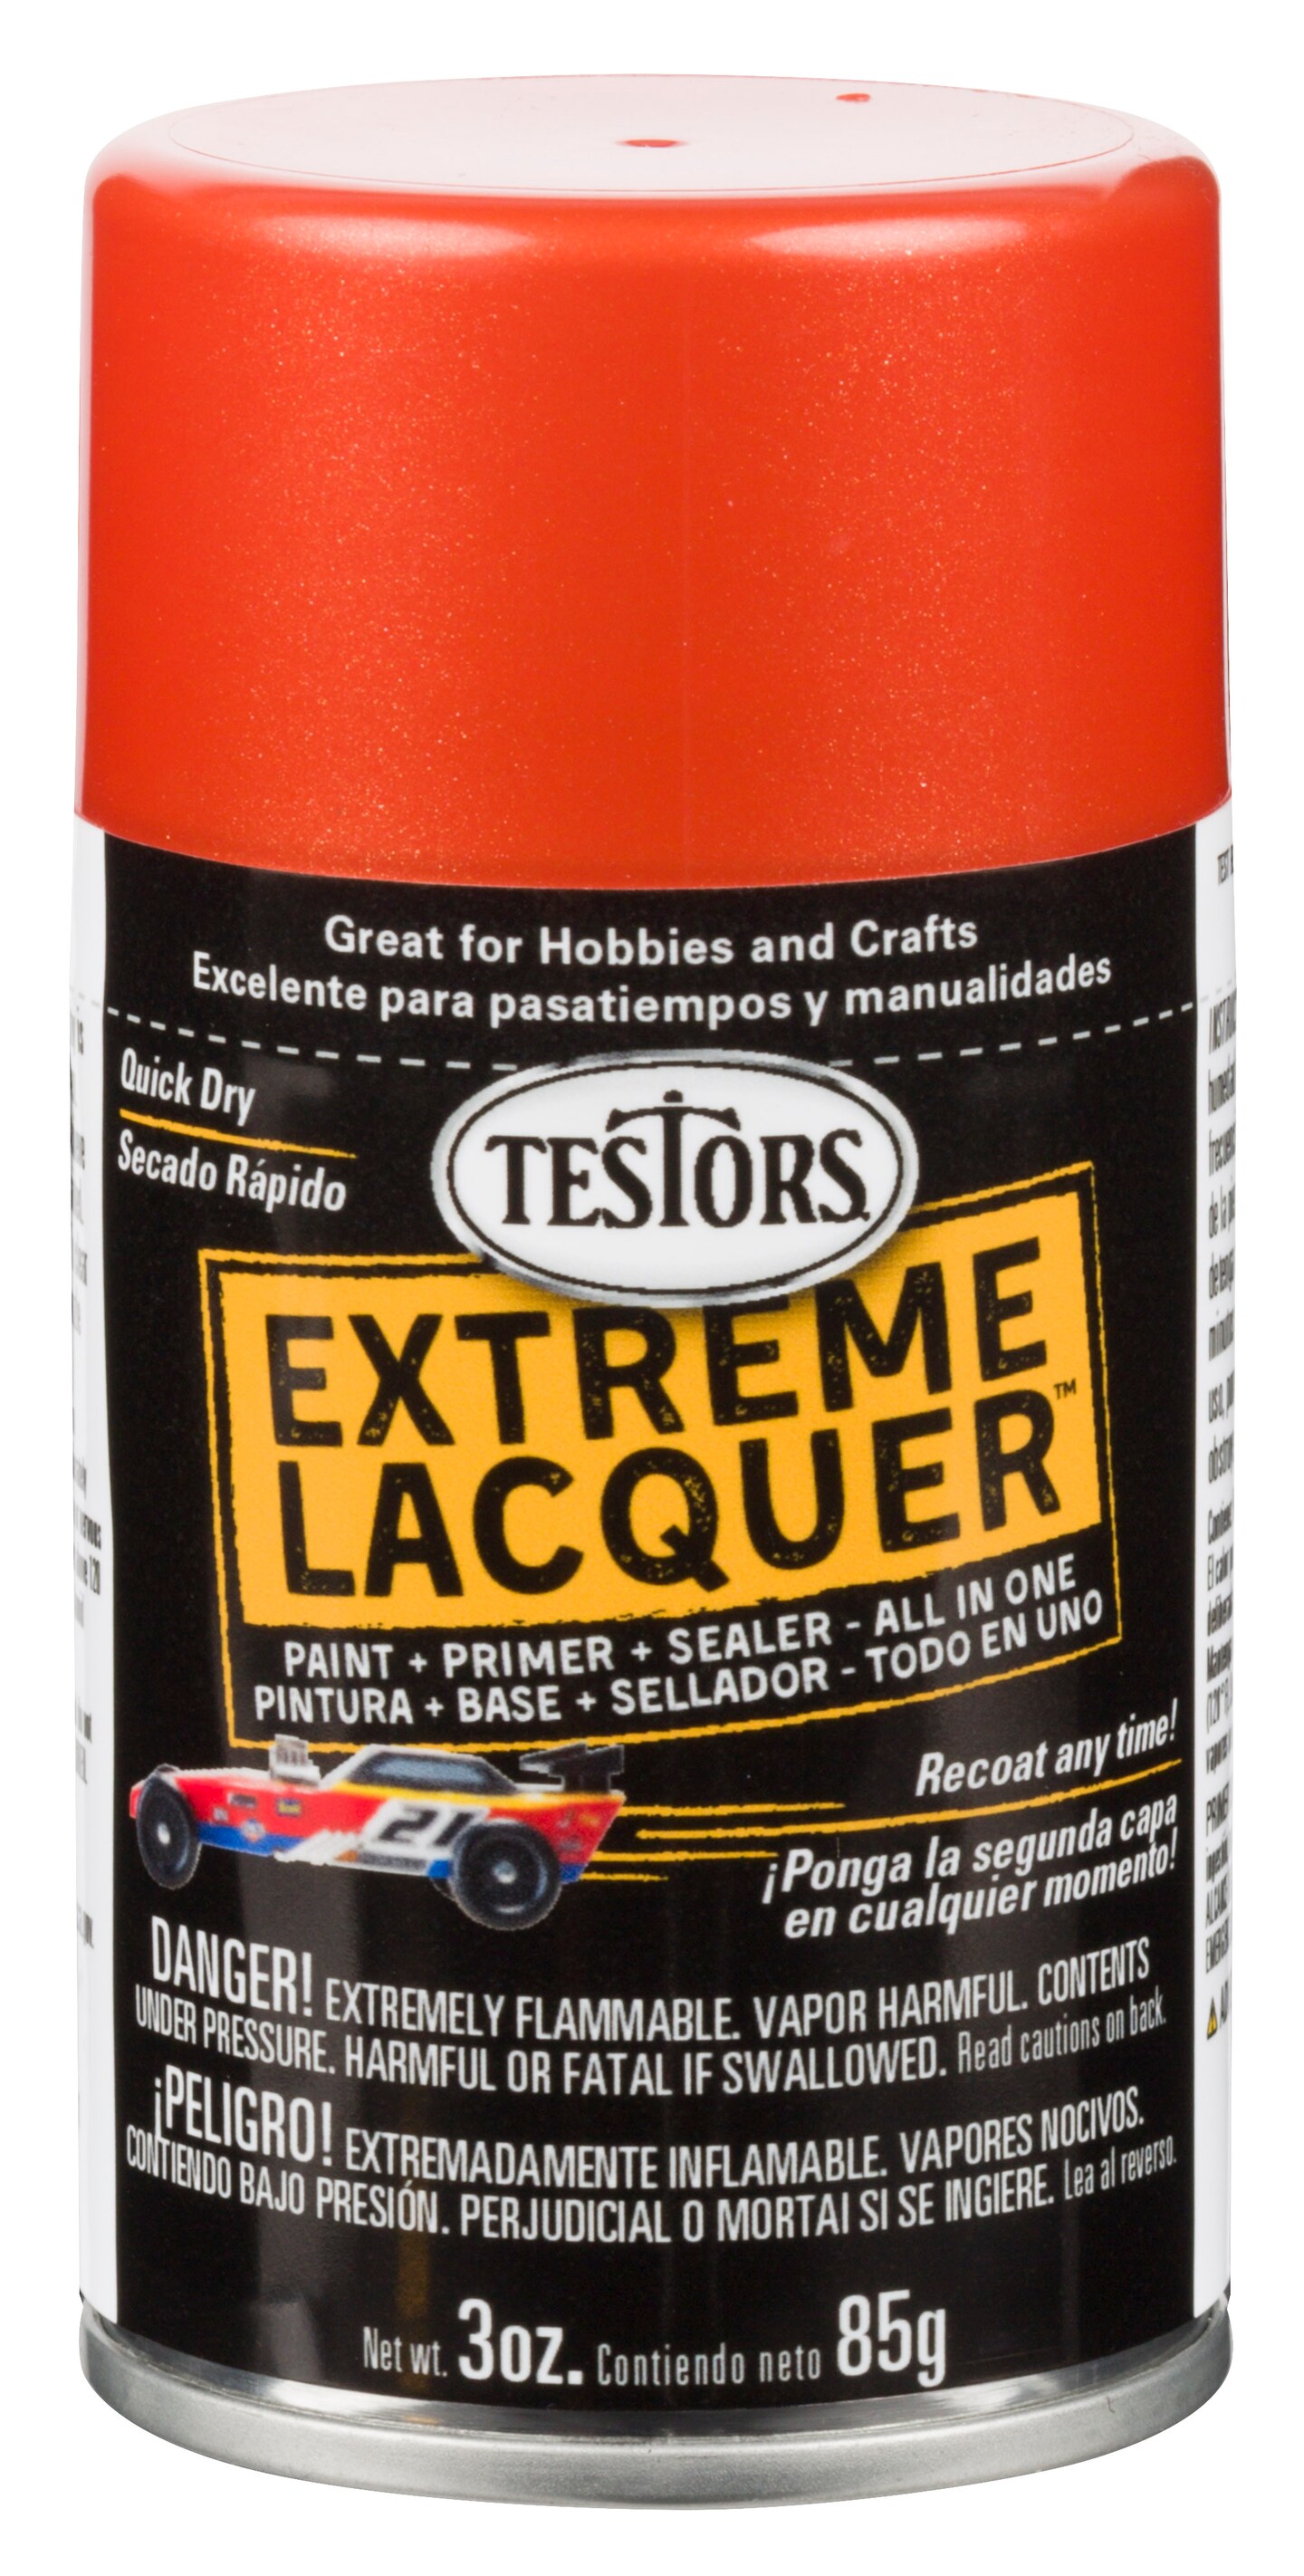 Testors One Coat Lacquer Paint, 3 oz. Spray Can, Flaming Orange